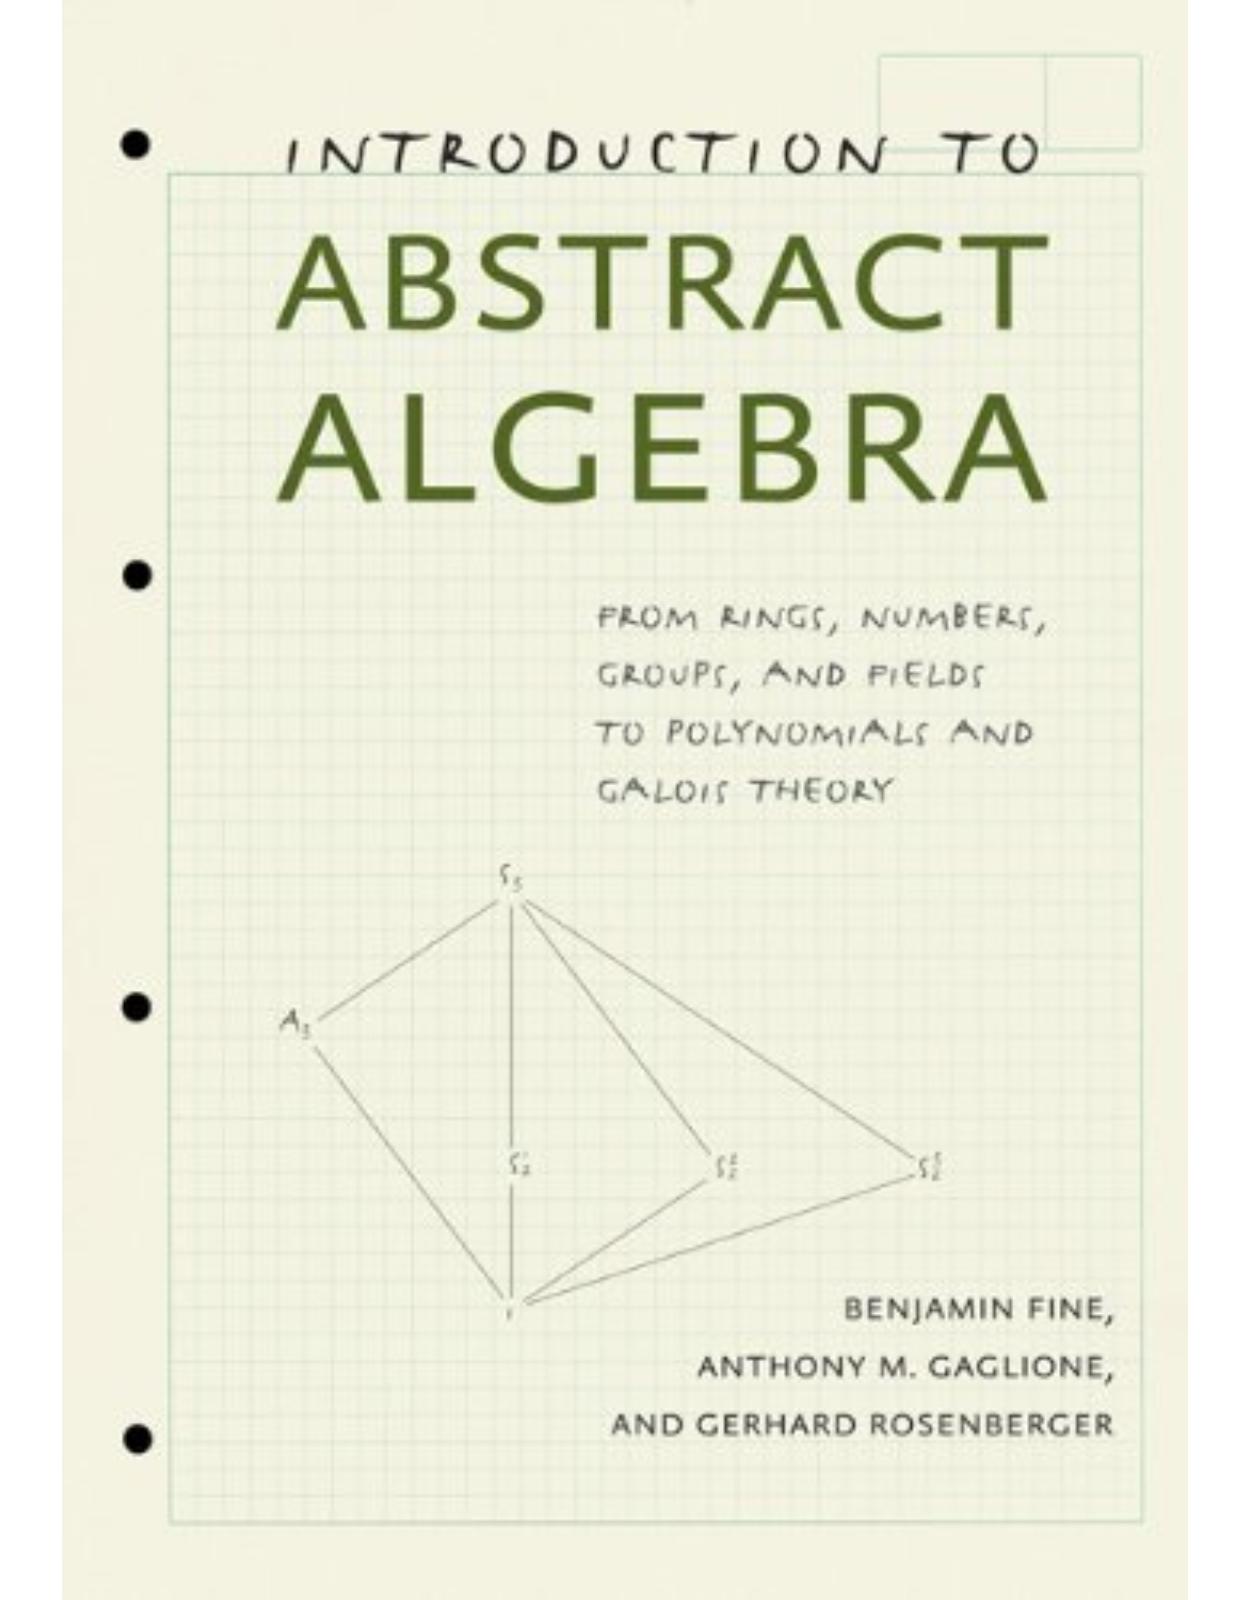 Introduction to Abstract Algebra, From Rings, Numbers, Groups, and Fields to Polynomials and Galois Theory